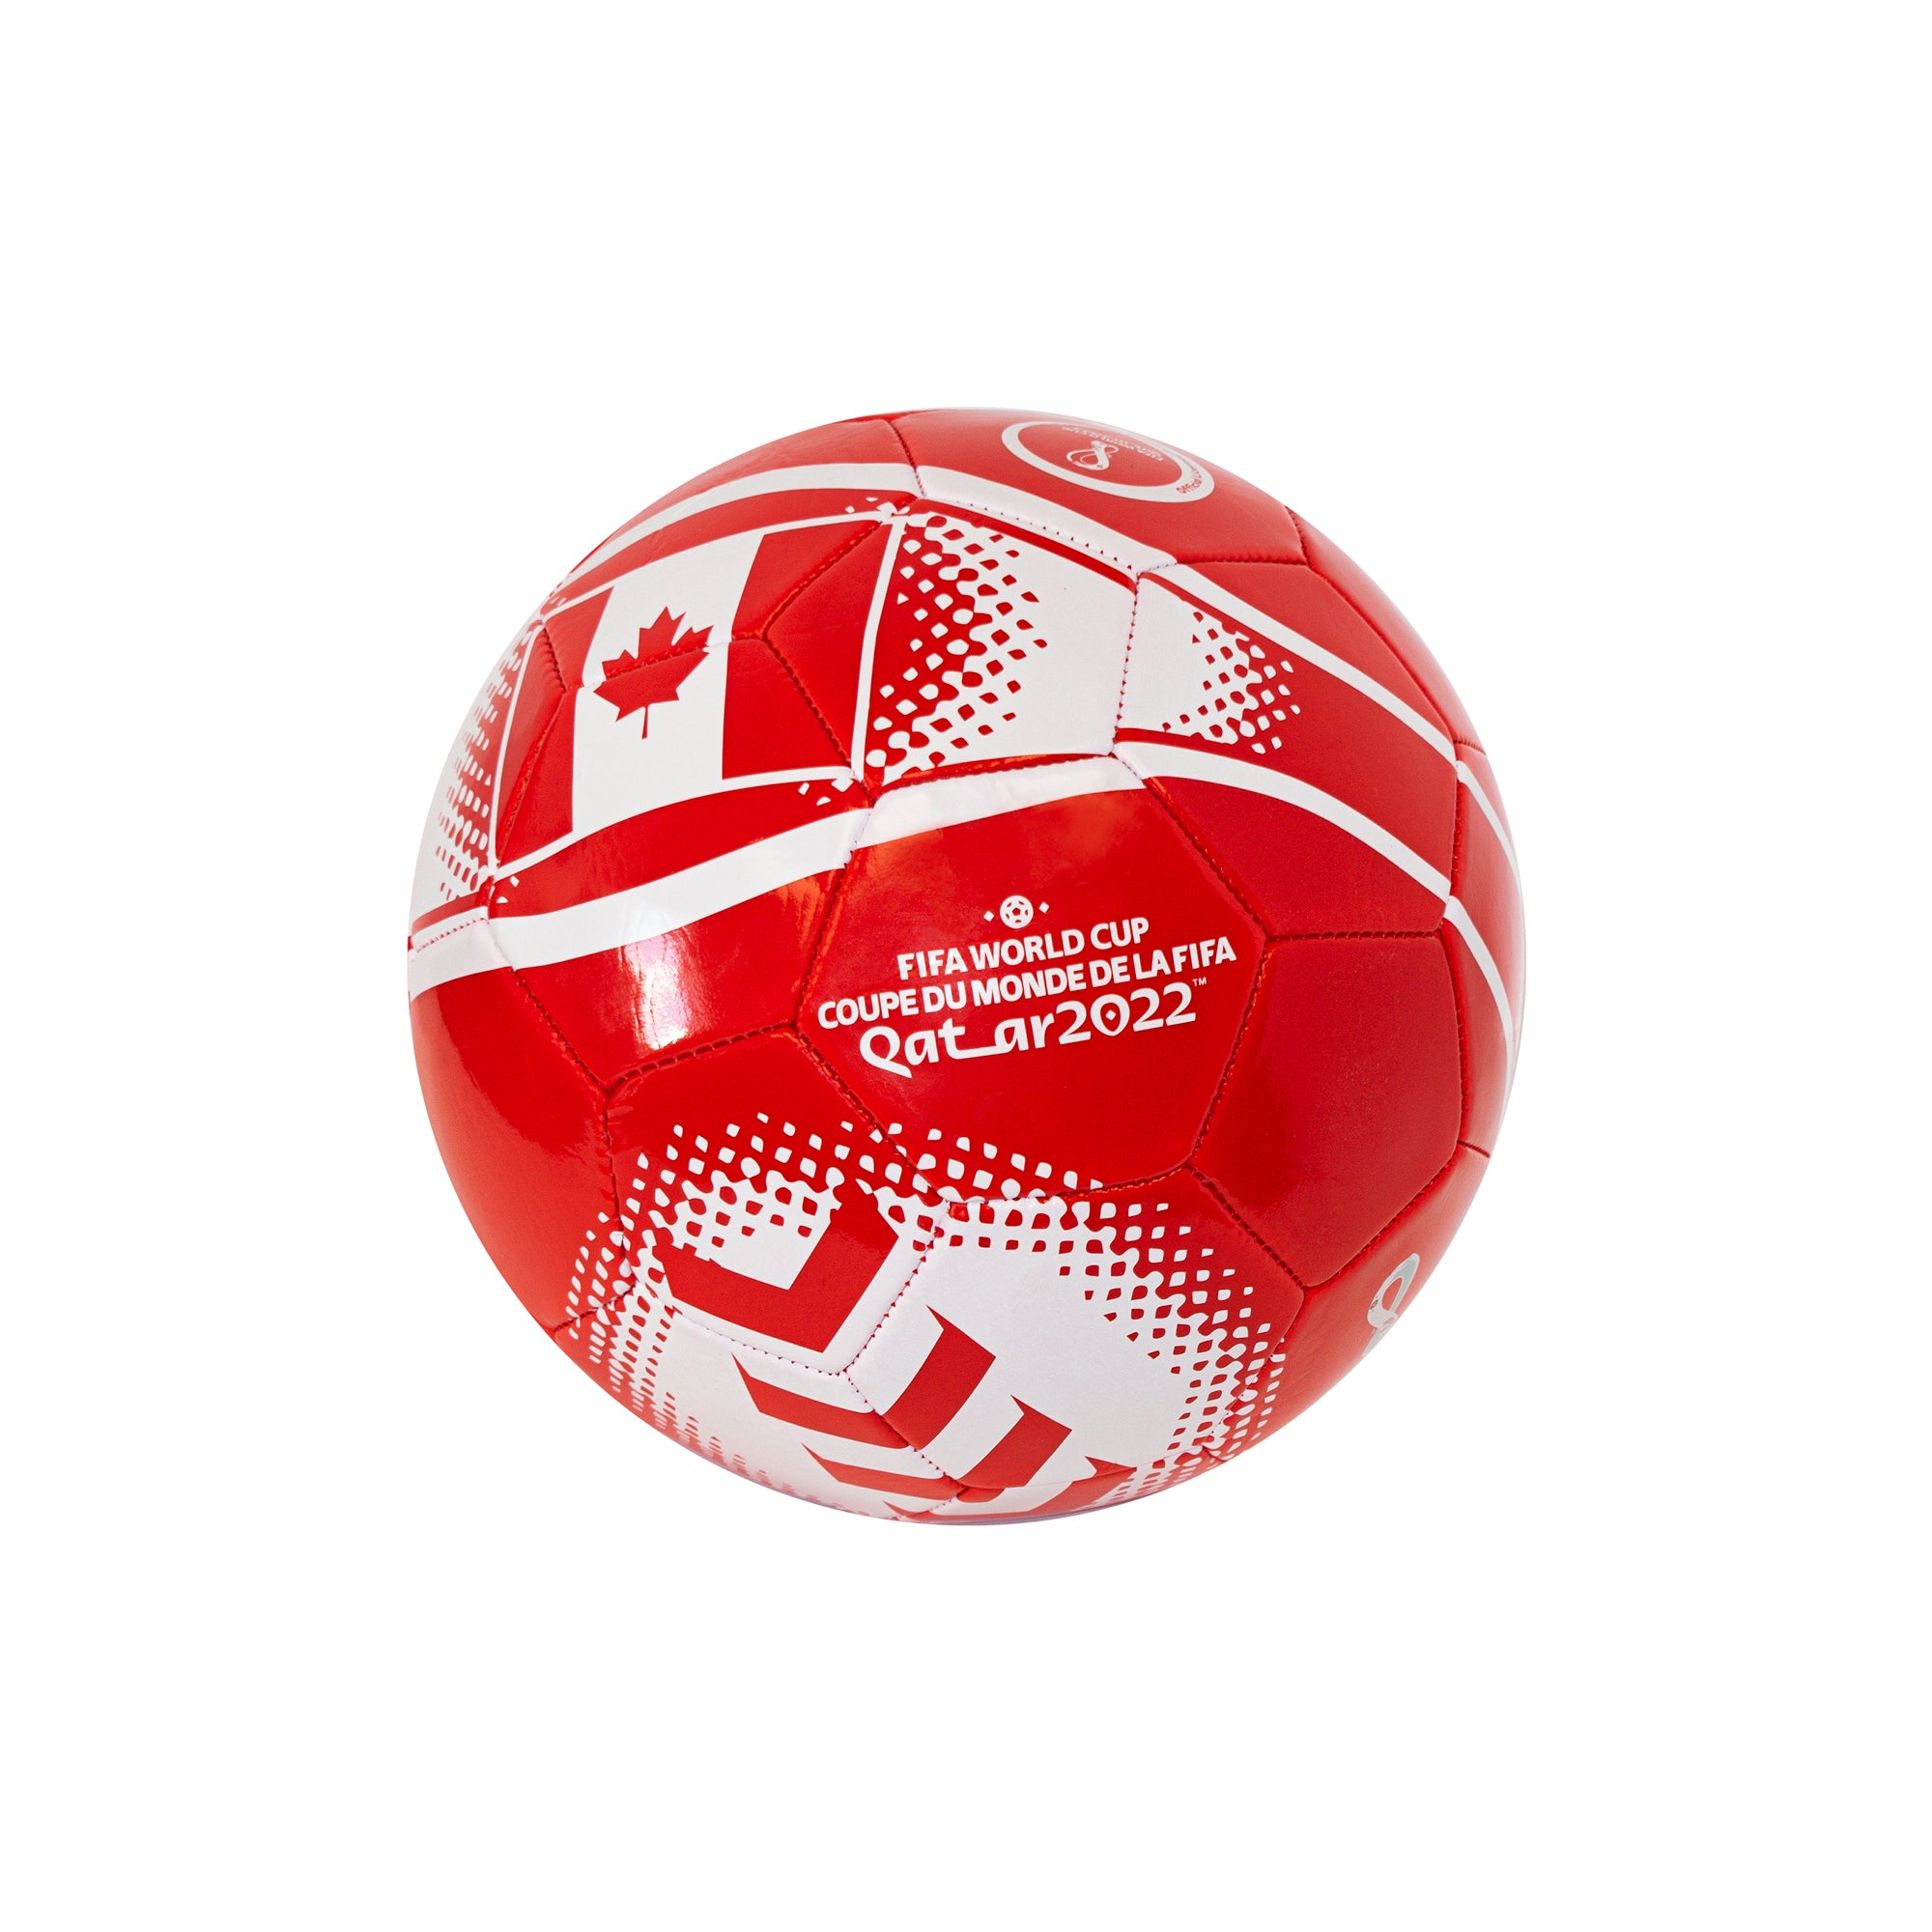 CANADA – FIFA WORLD CUP 2022 RED SOCCER BALL (SIZE 5)